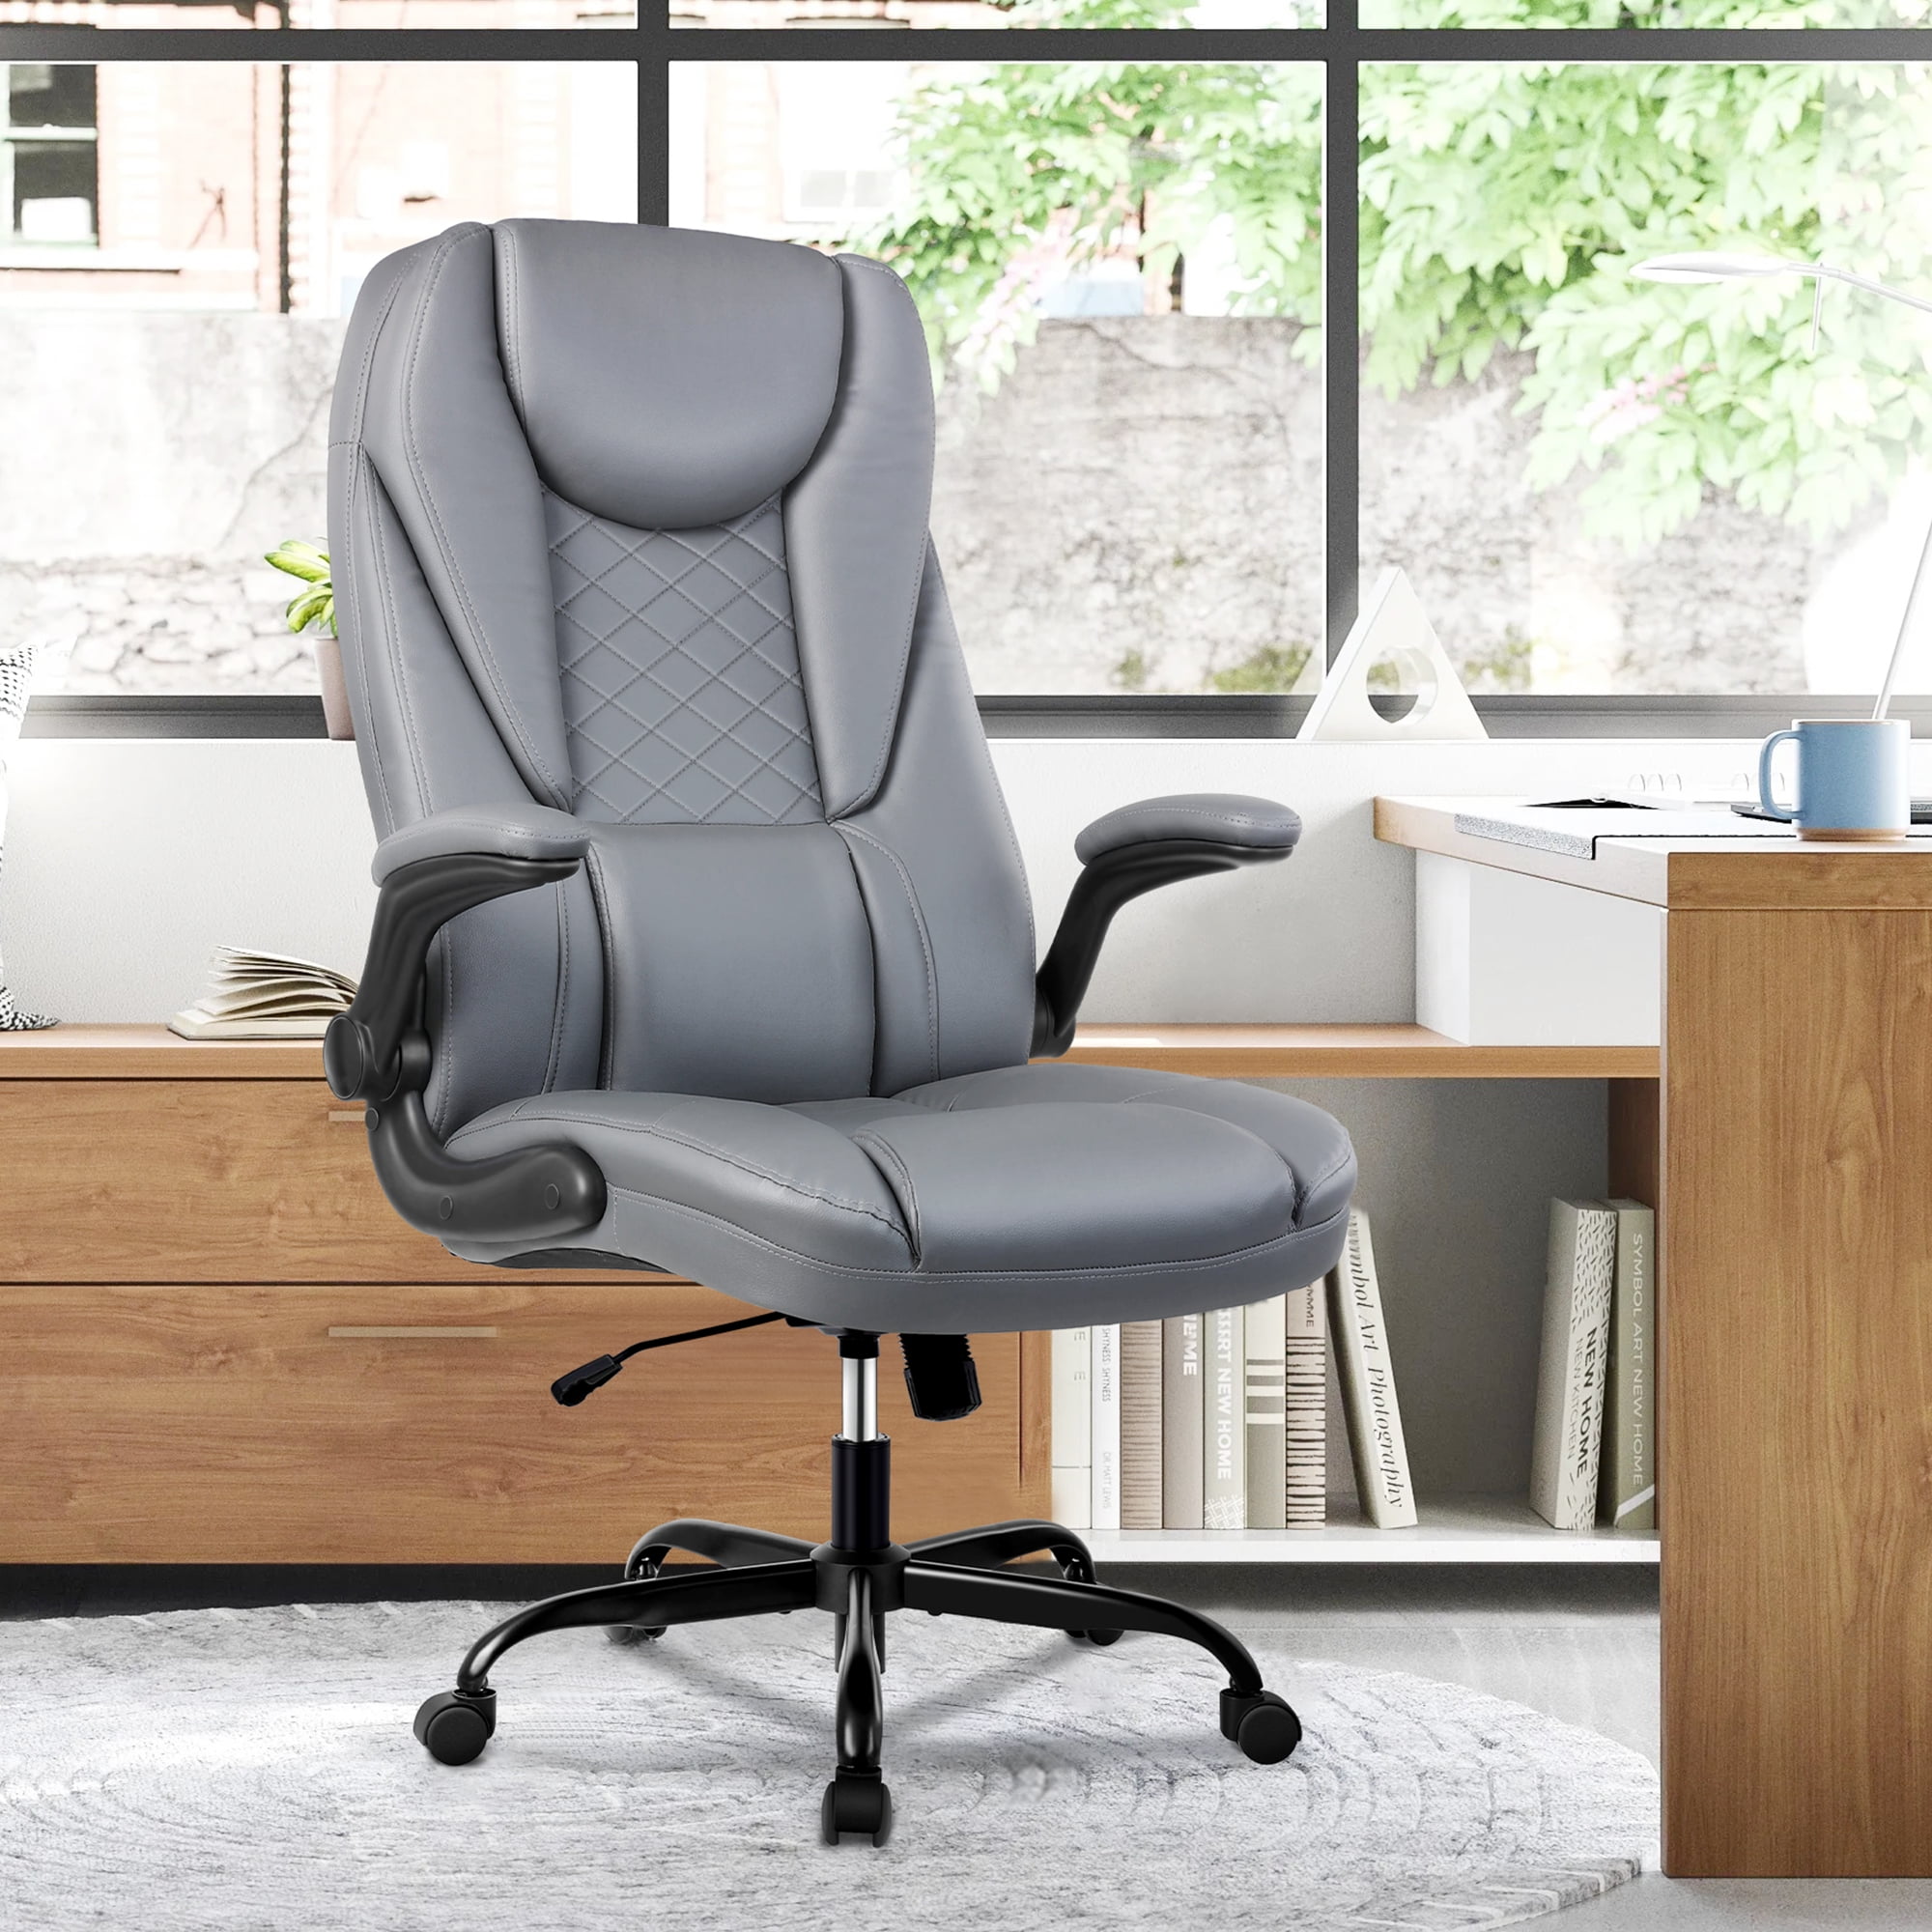 Coolhut Office Chair, Executive Office Chair Big and Tall Office Chair  Ergonomic Leather Chair with Adjustable Flip-Up Arms High Back Home Office  Desk